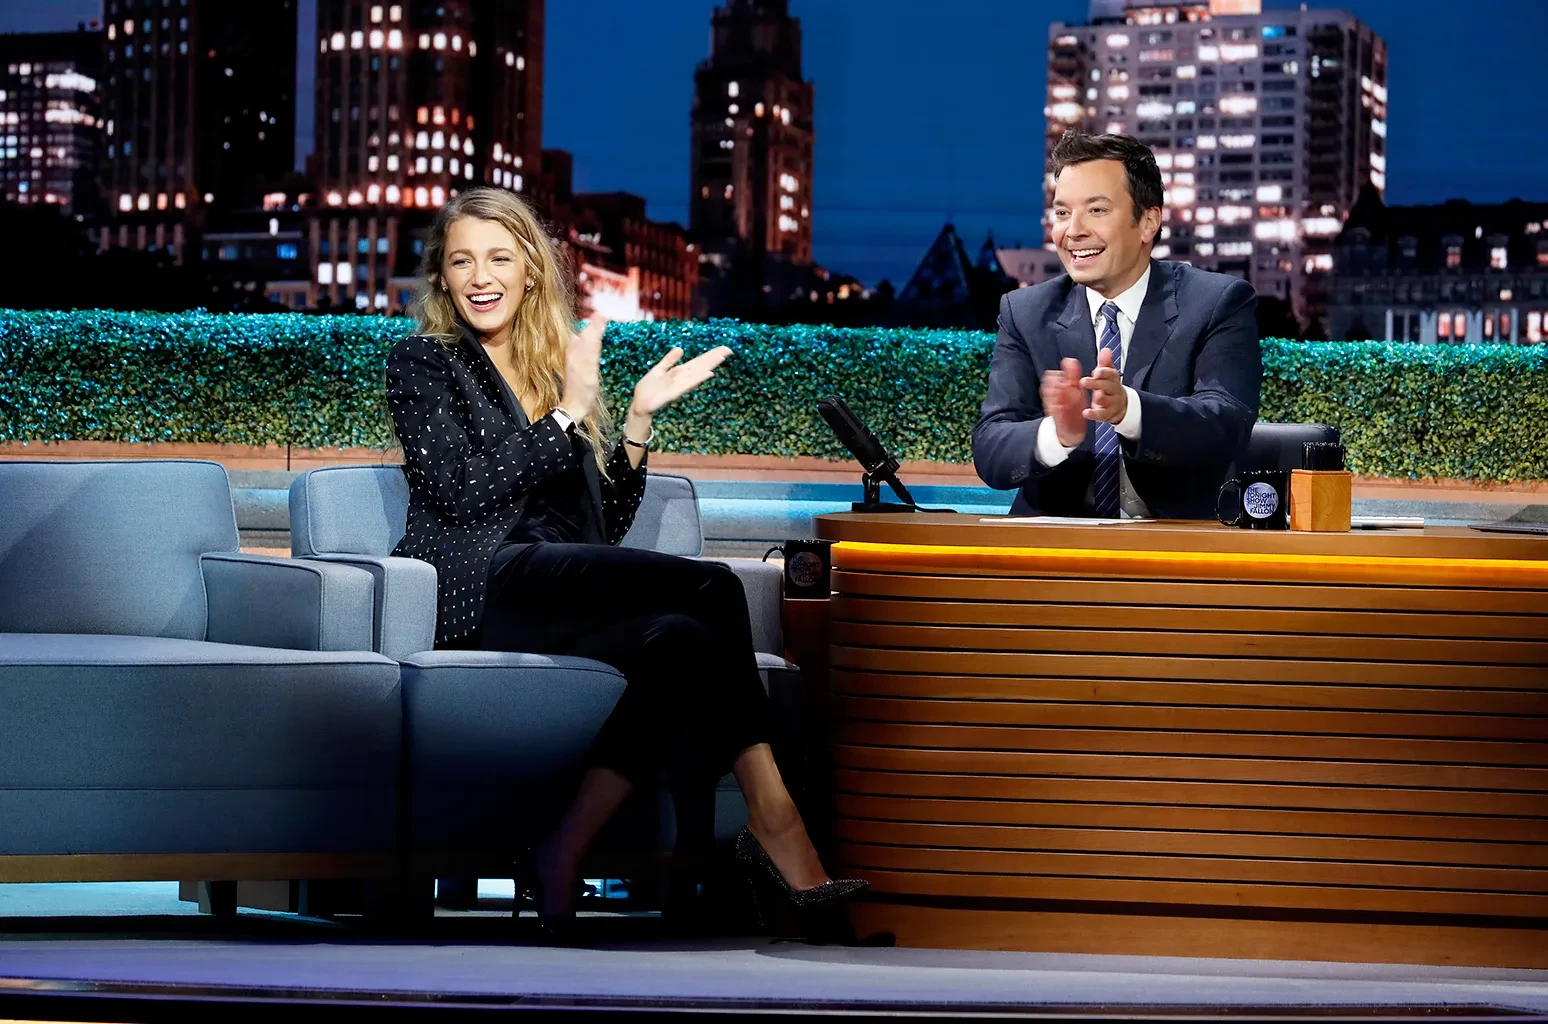 Blake Lively on The Tonight Show Starring Jimmy Fallon,